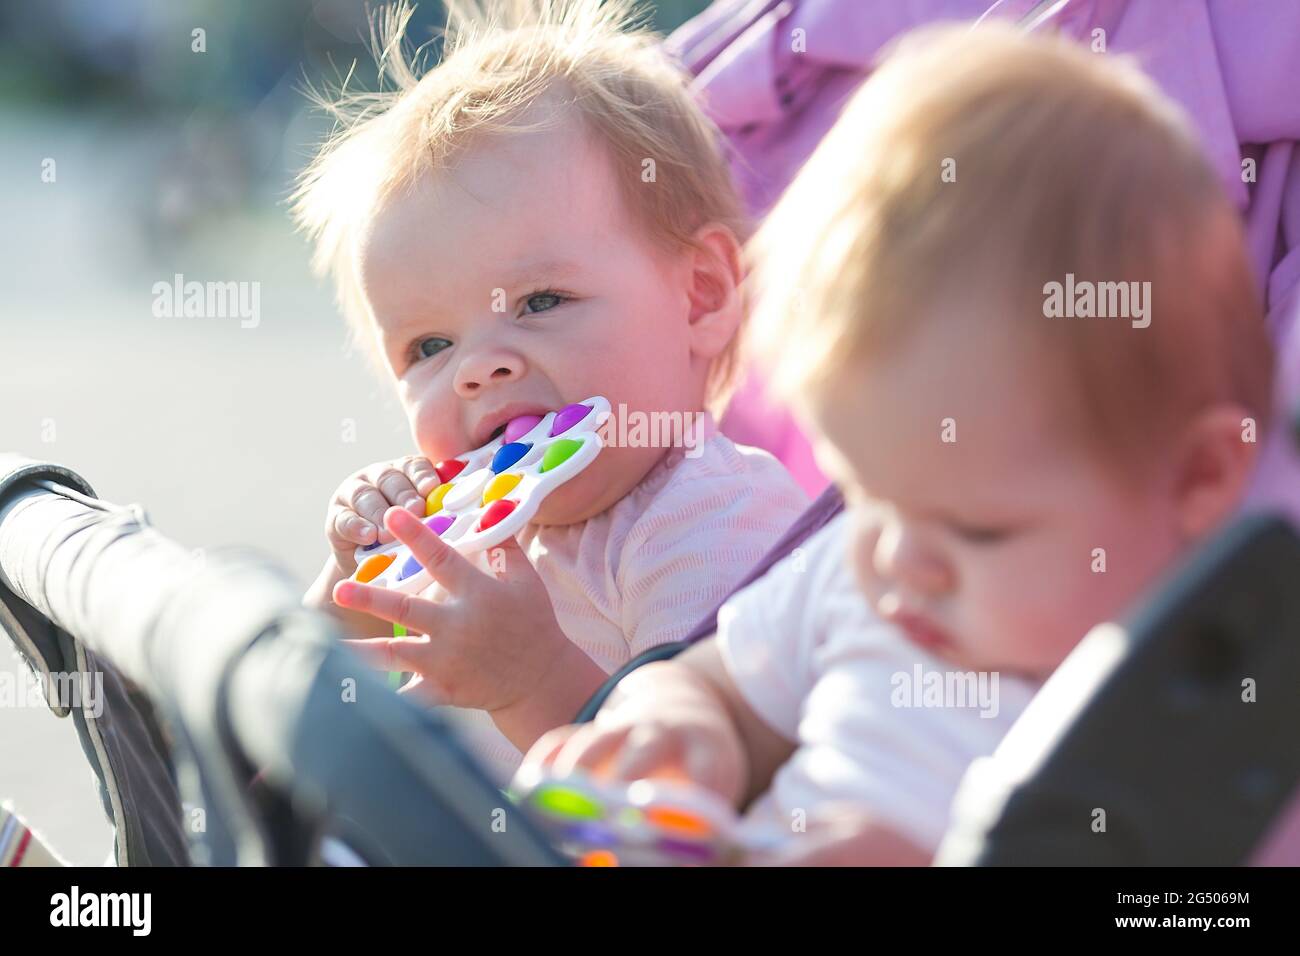 Twin children sit in a baby carriage with toys in their hands. Stock Photo